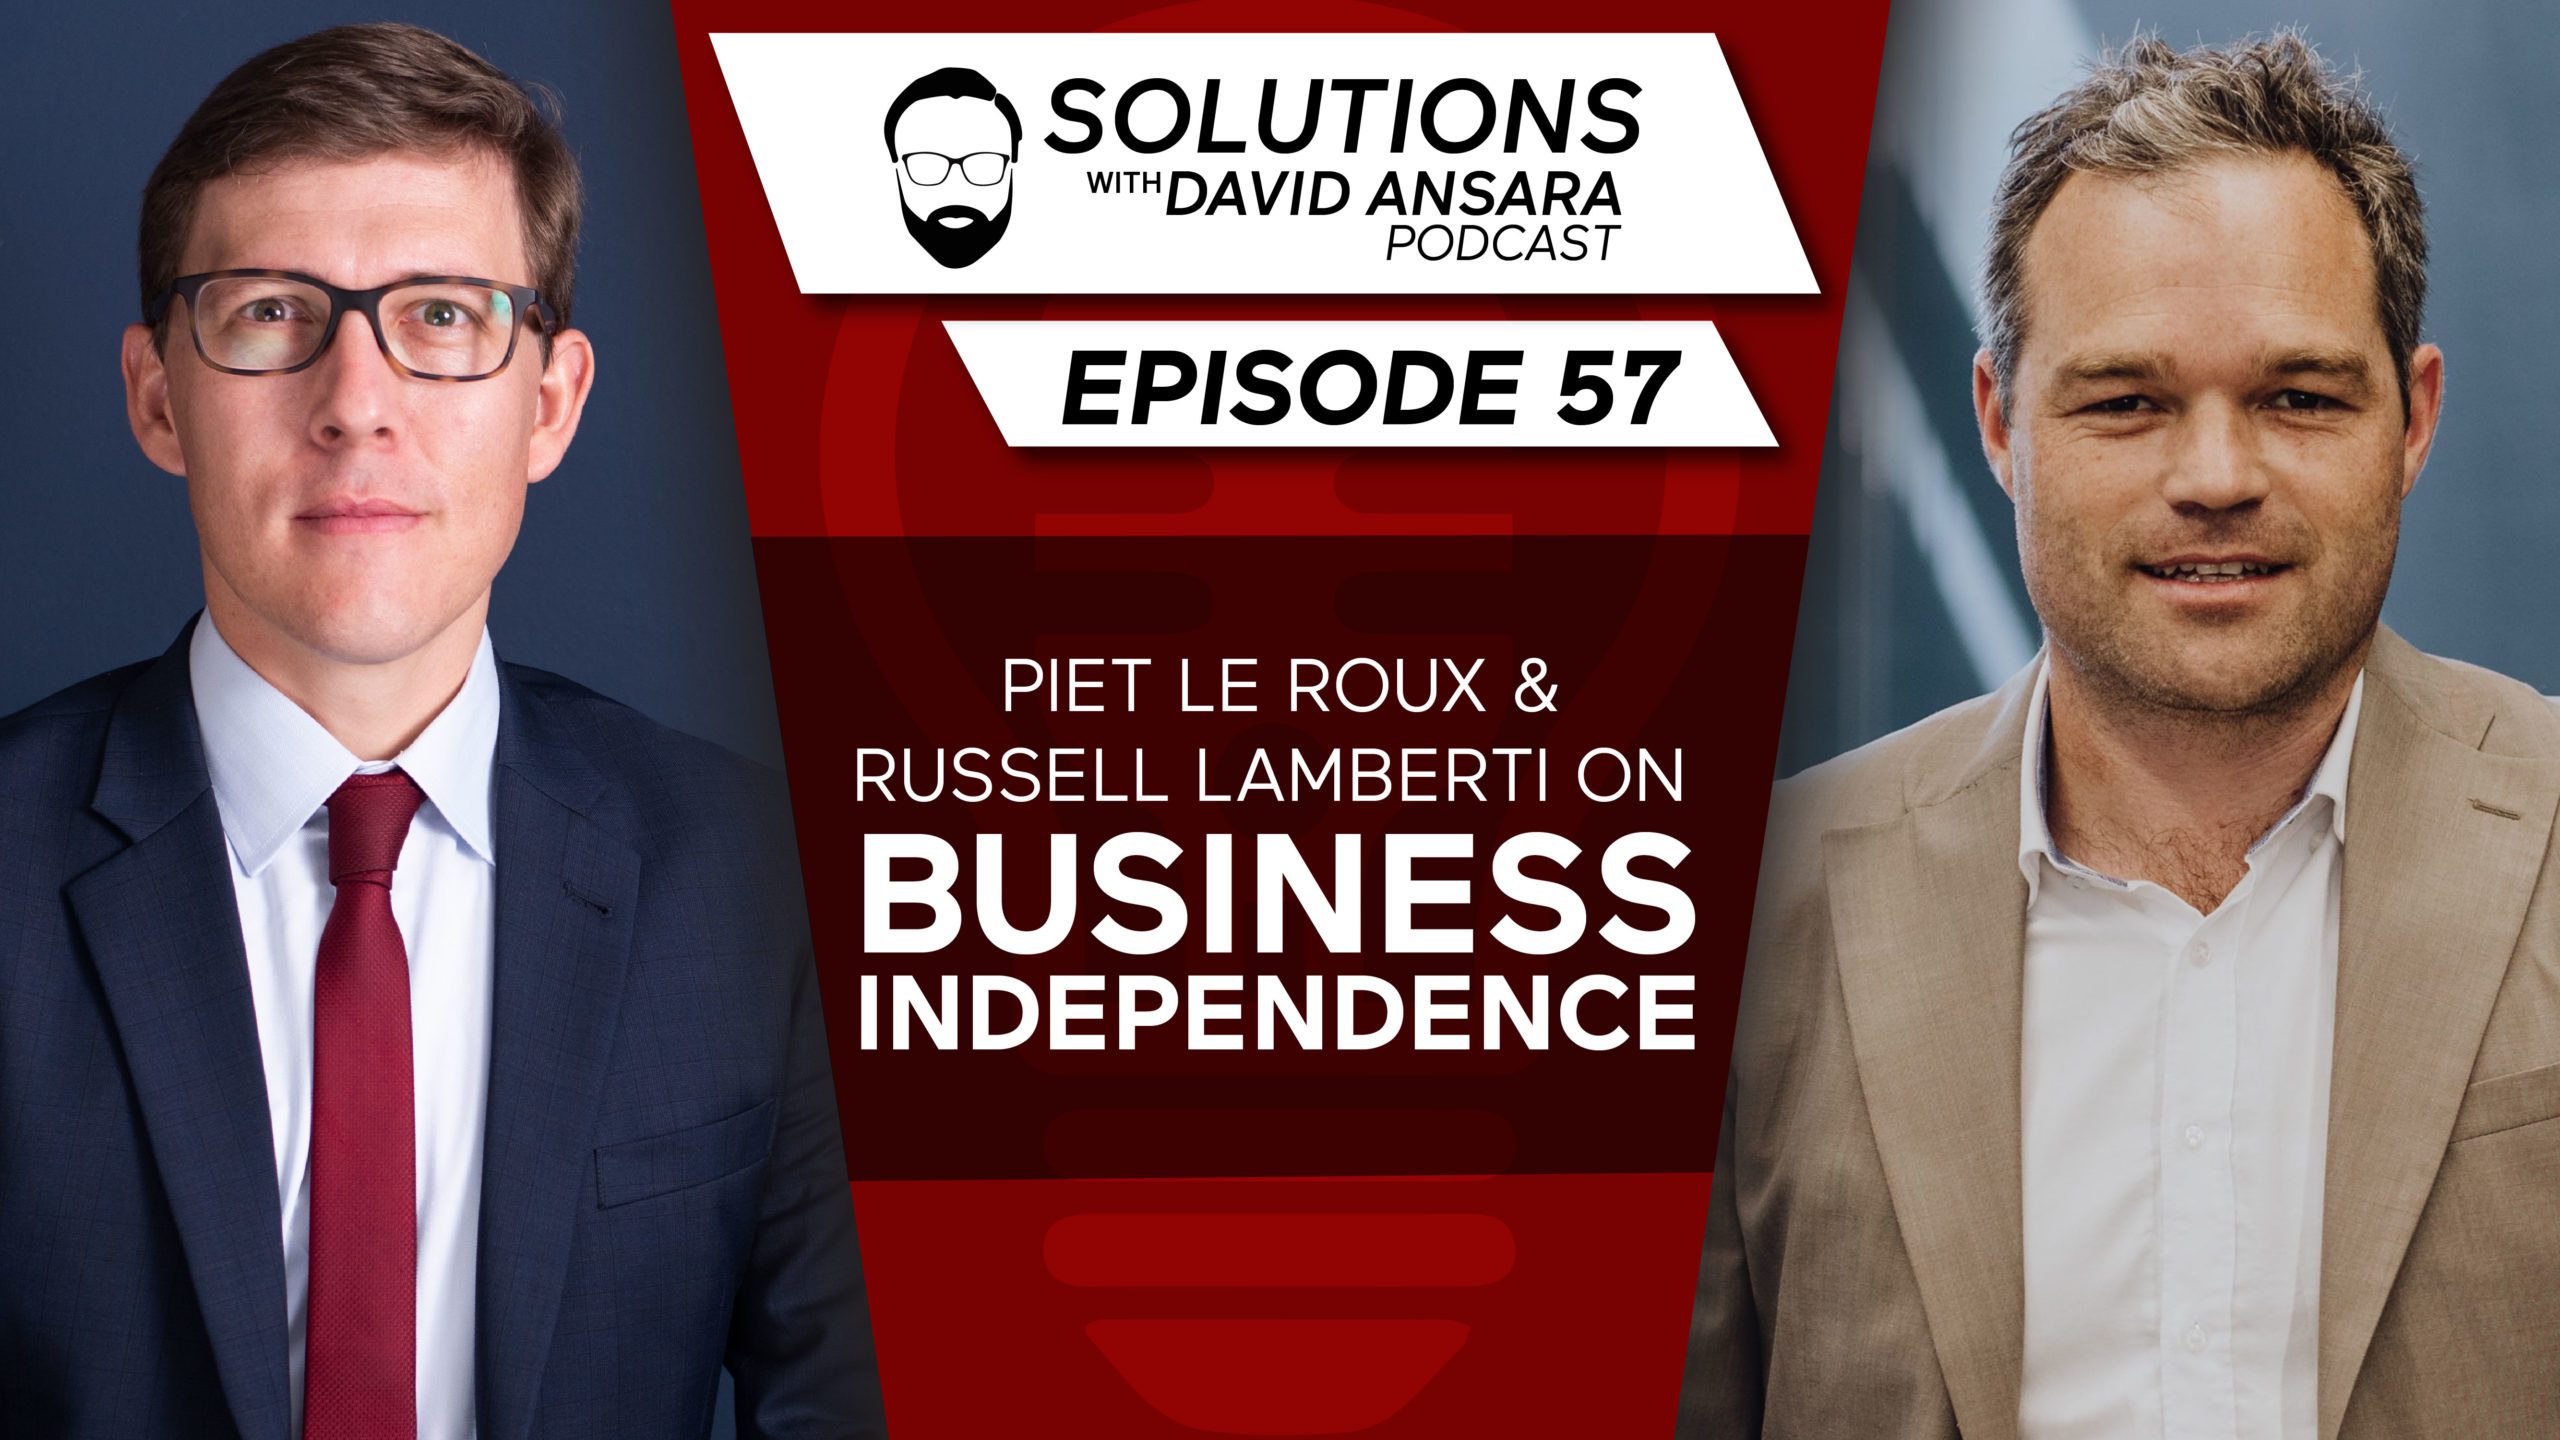 piet-le-roux-&-russell-lamberti-on-building-an-independent-business-community-|-solutions-with-david-ansara-podcast-#57